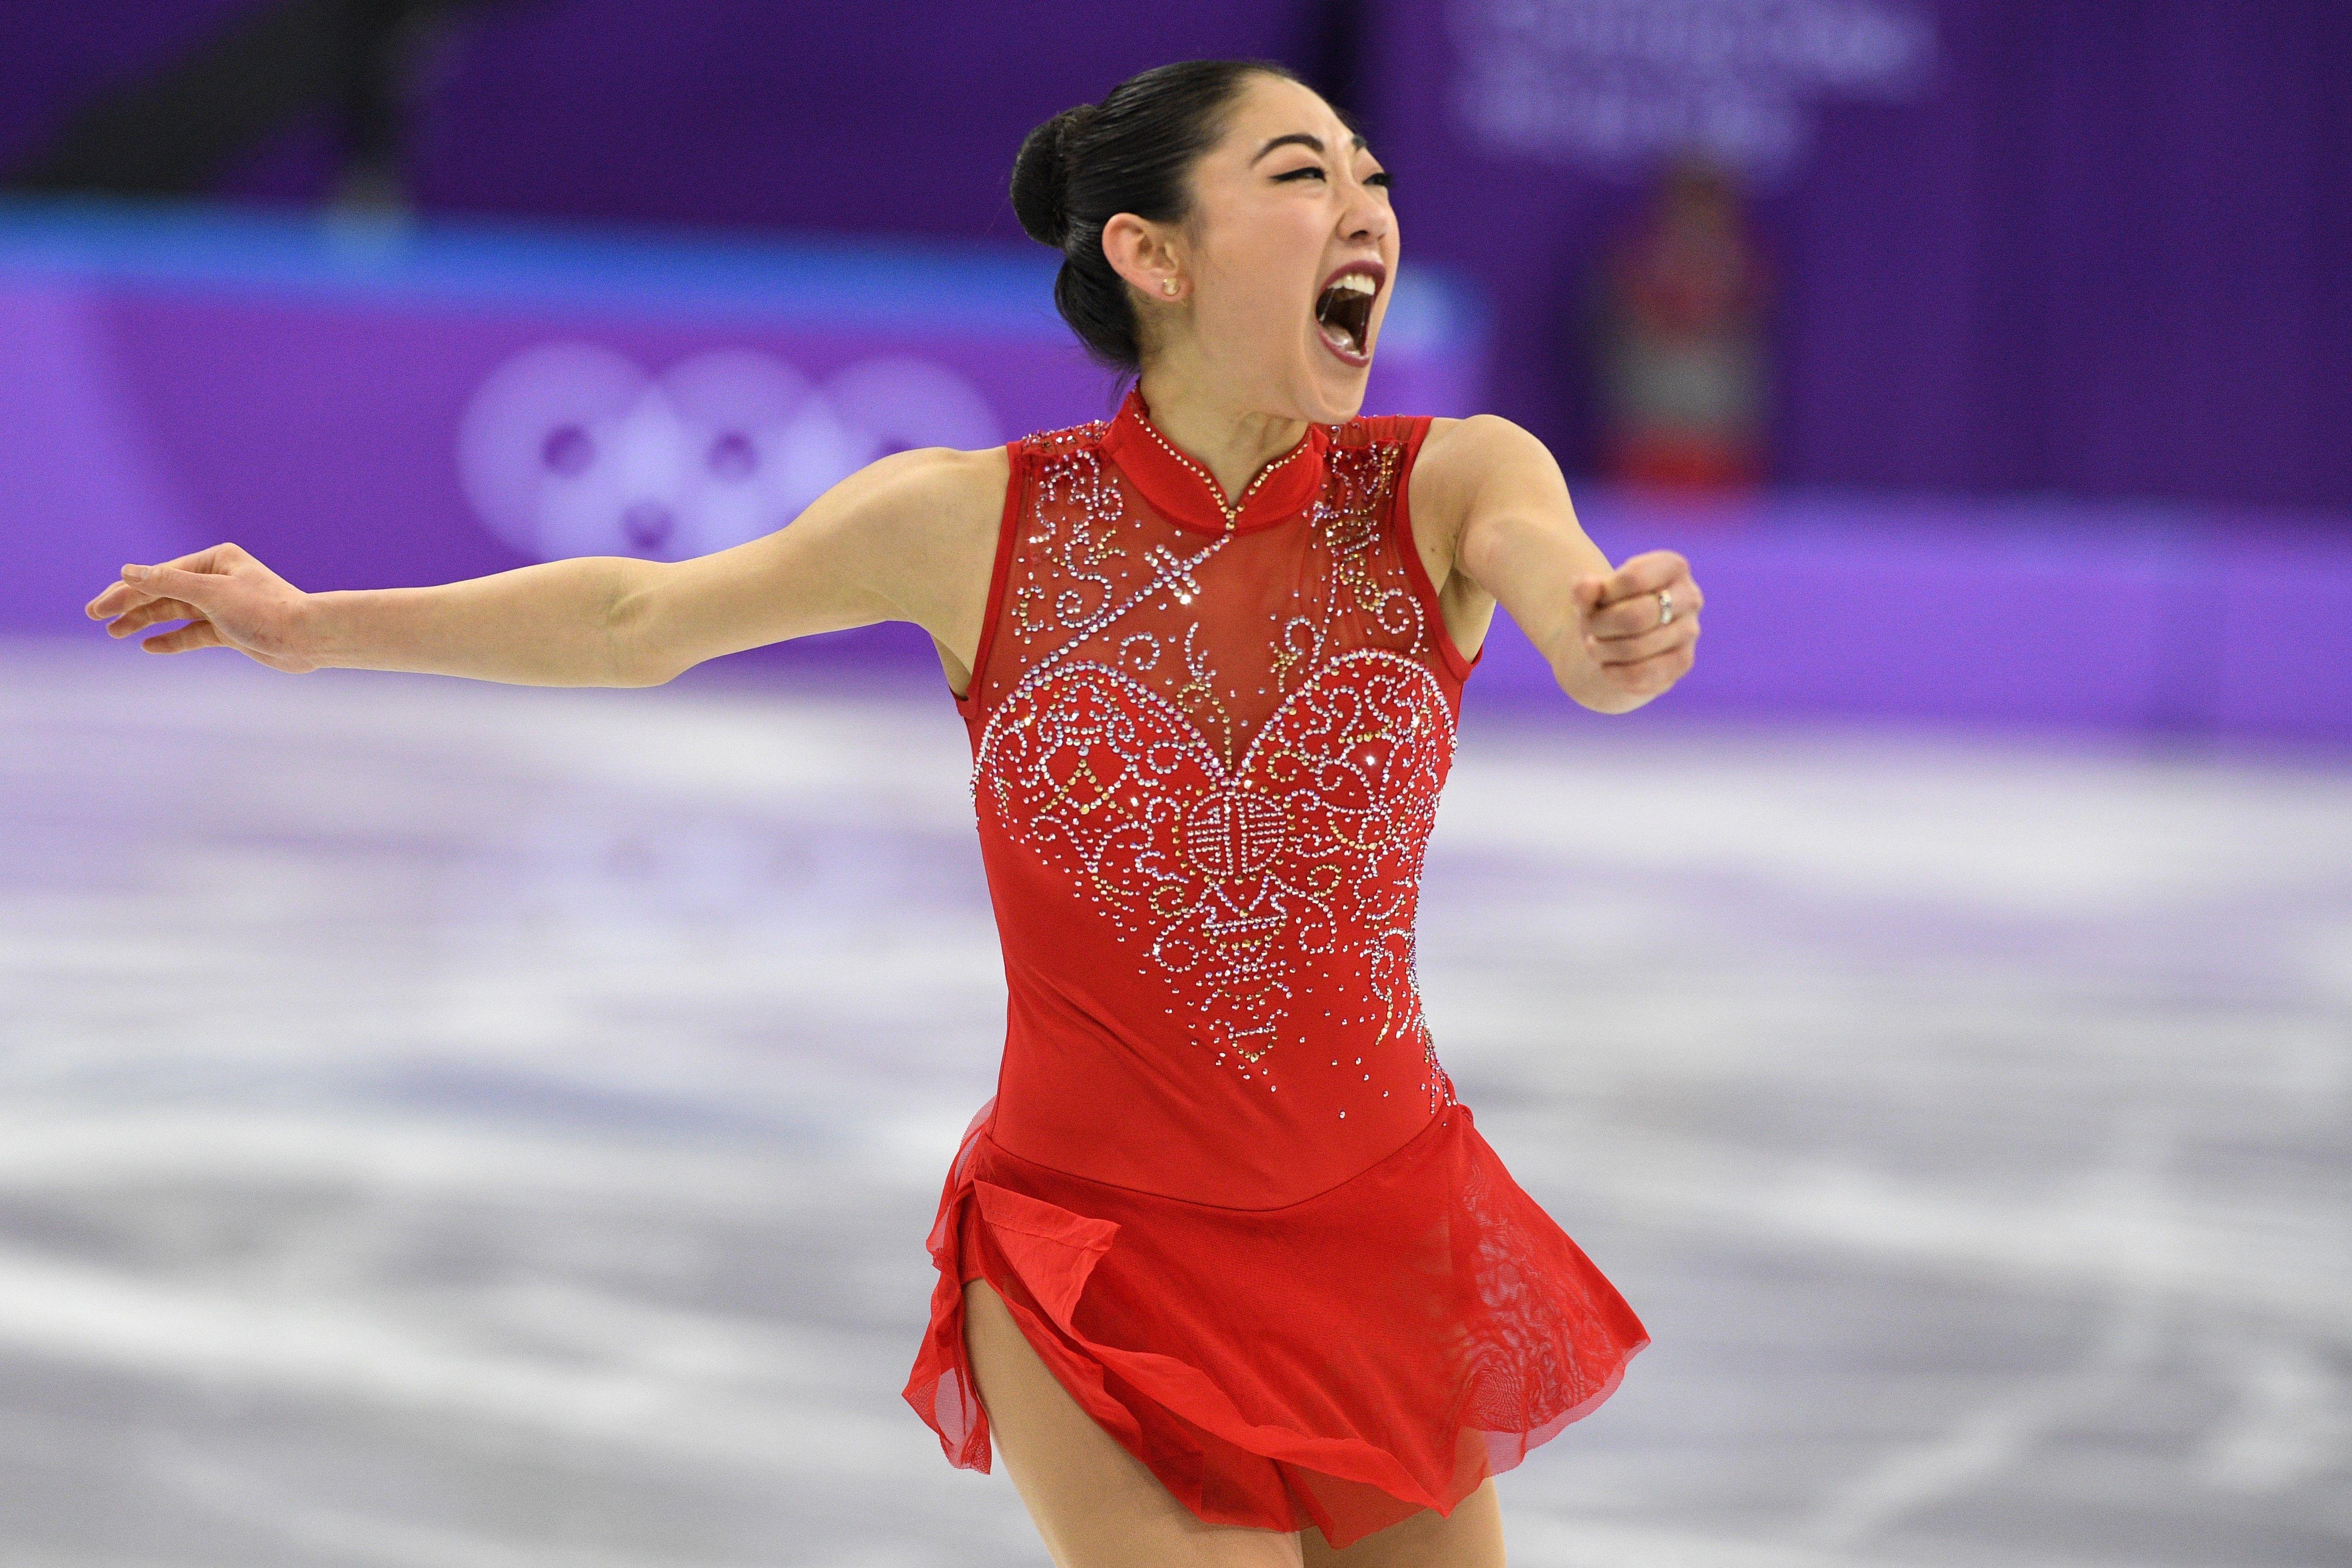 Mirai Nagasu is the third woman to do a triple axel in the Olympics.